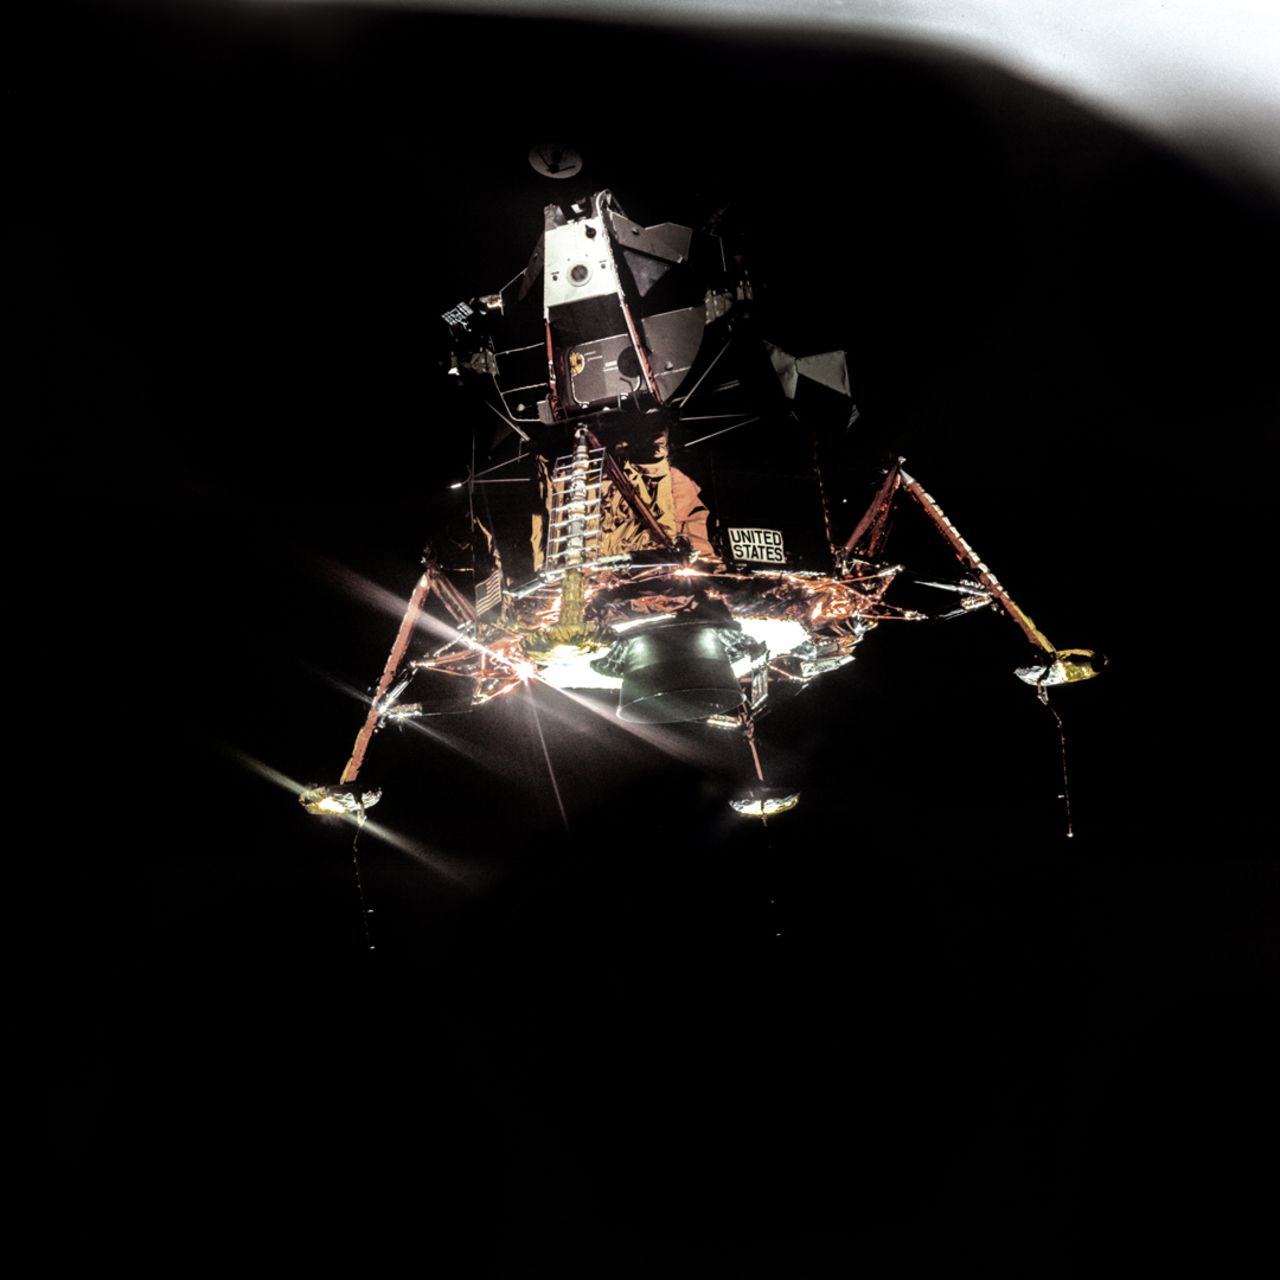 Neil Armstrong guides Apollo 11's Lunar Module, Eagle (LM-5), before landing in the Sea of Tranquility on July 20, 1969. 